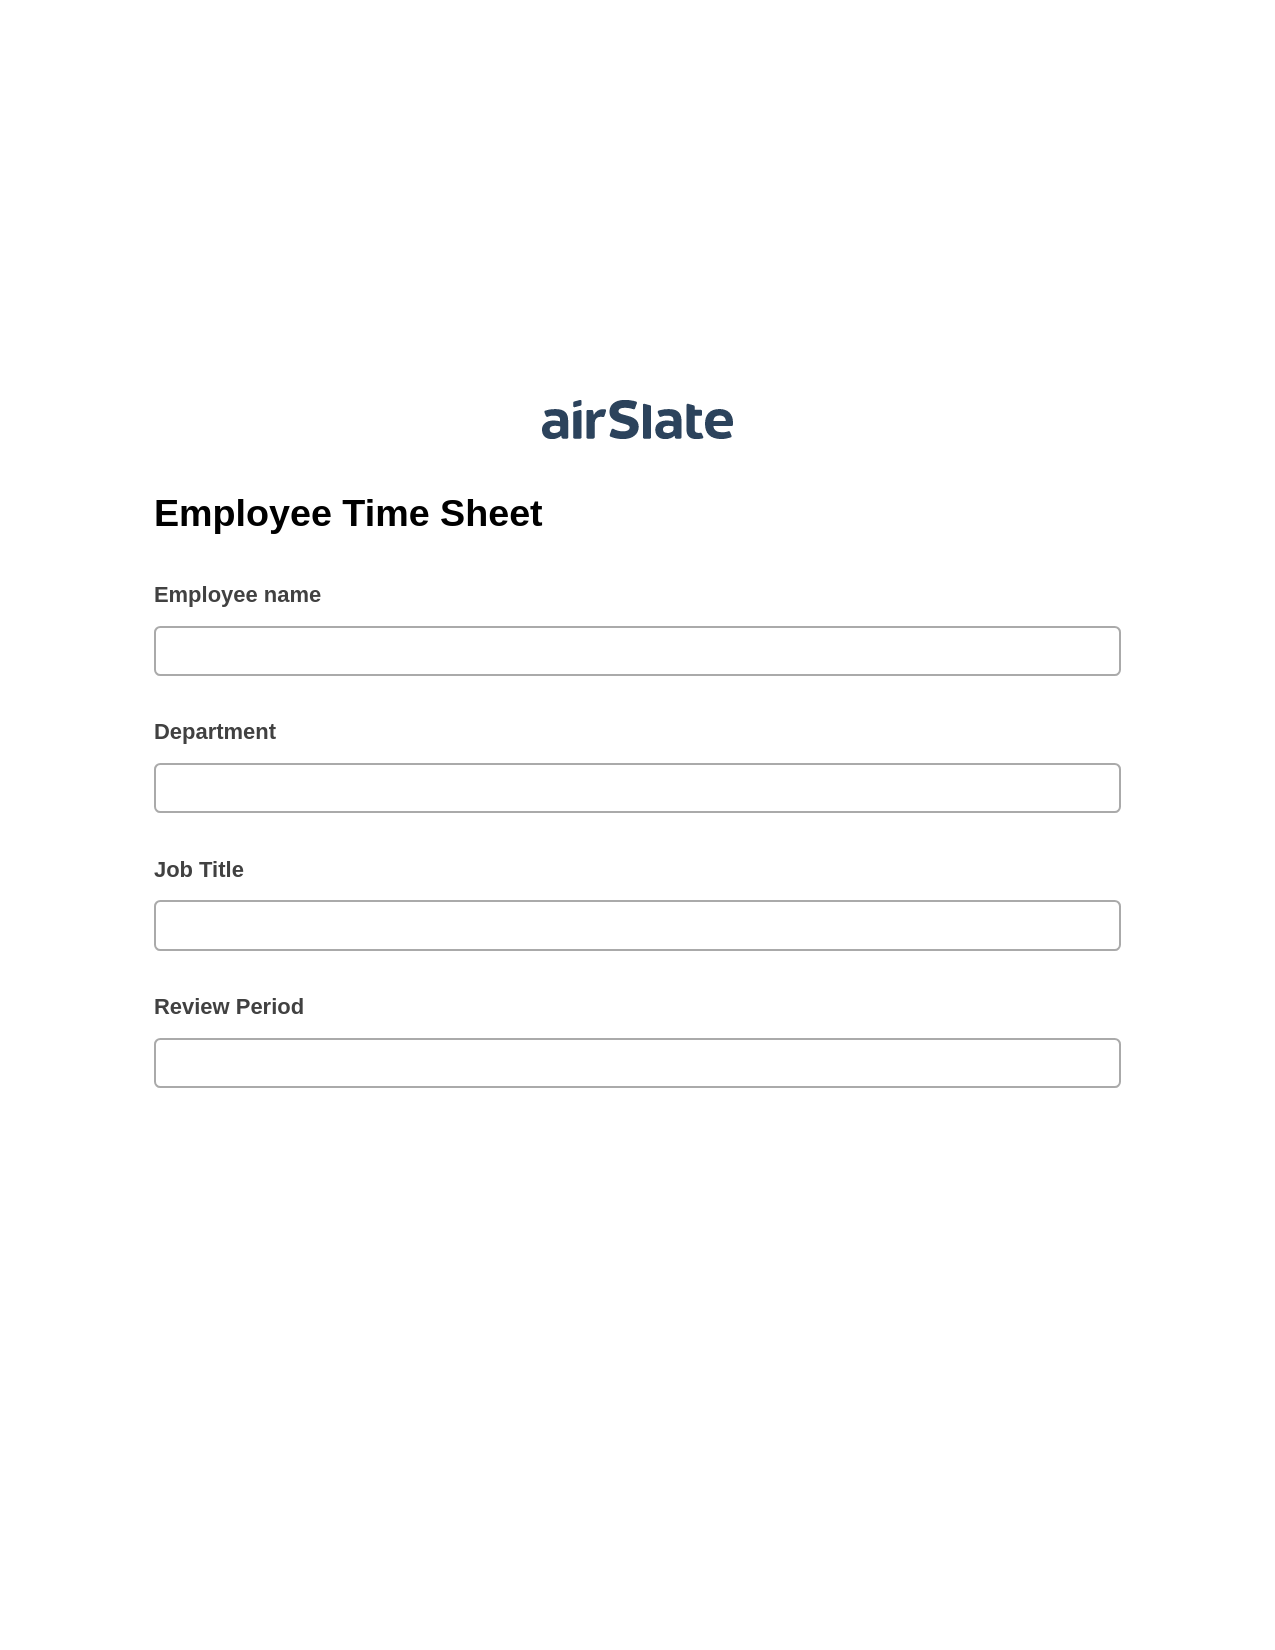 Multirole Employee Time Sheet Pre-fill from Office 365 Excel Bot, Invoke Salesforce Process Bot, Archive to SharePoint Folder Bot